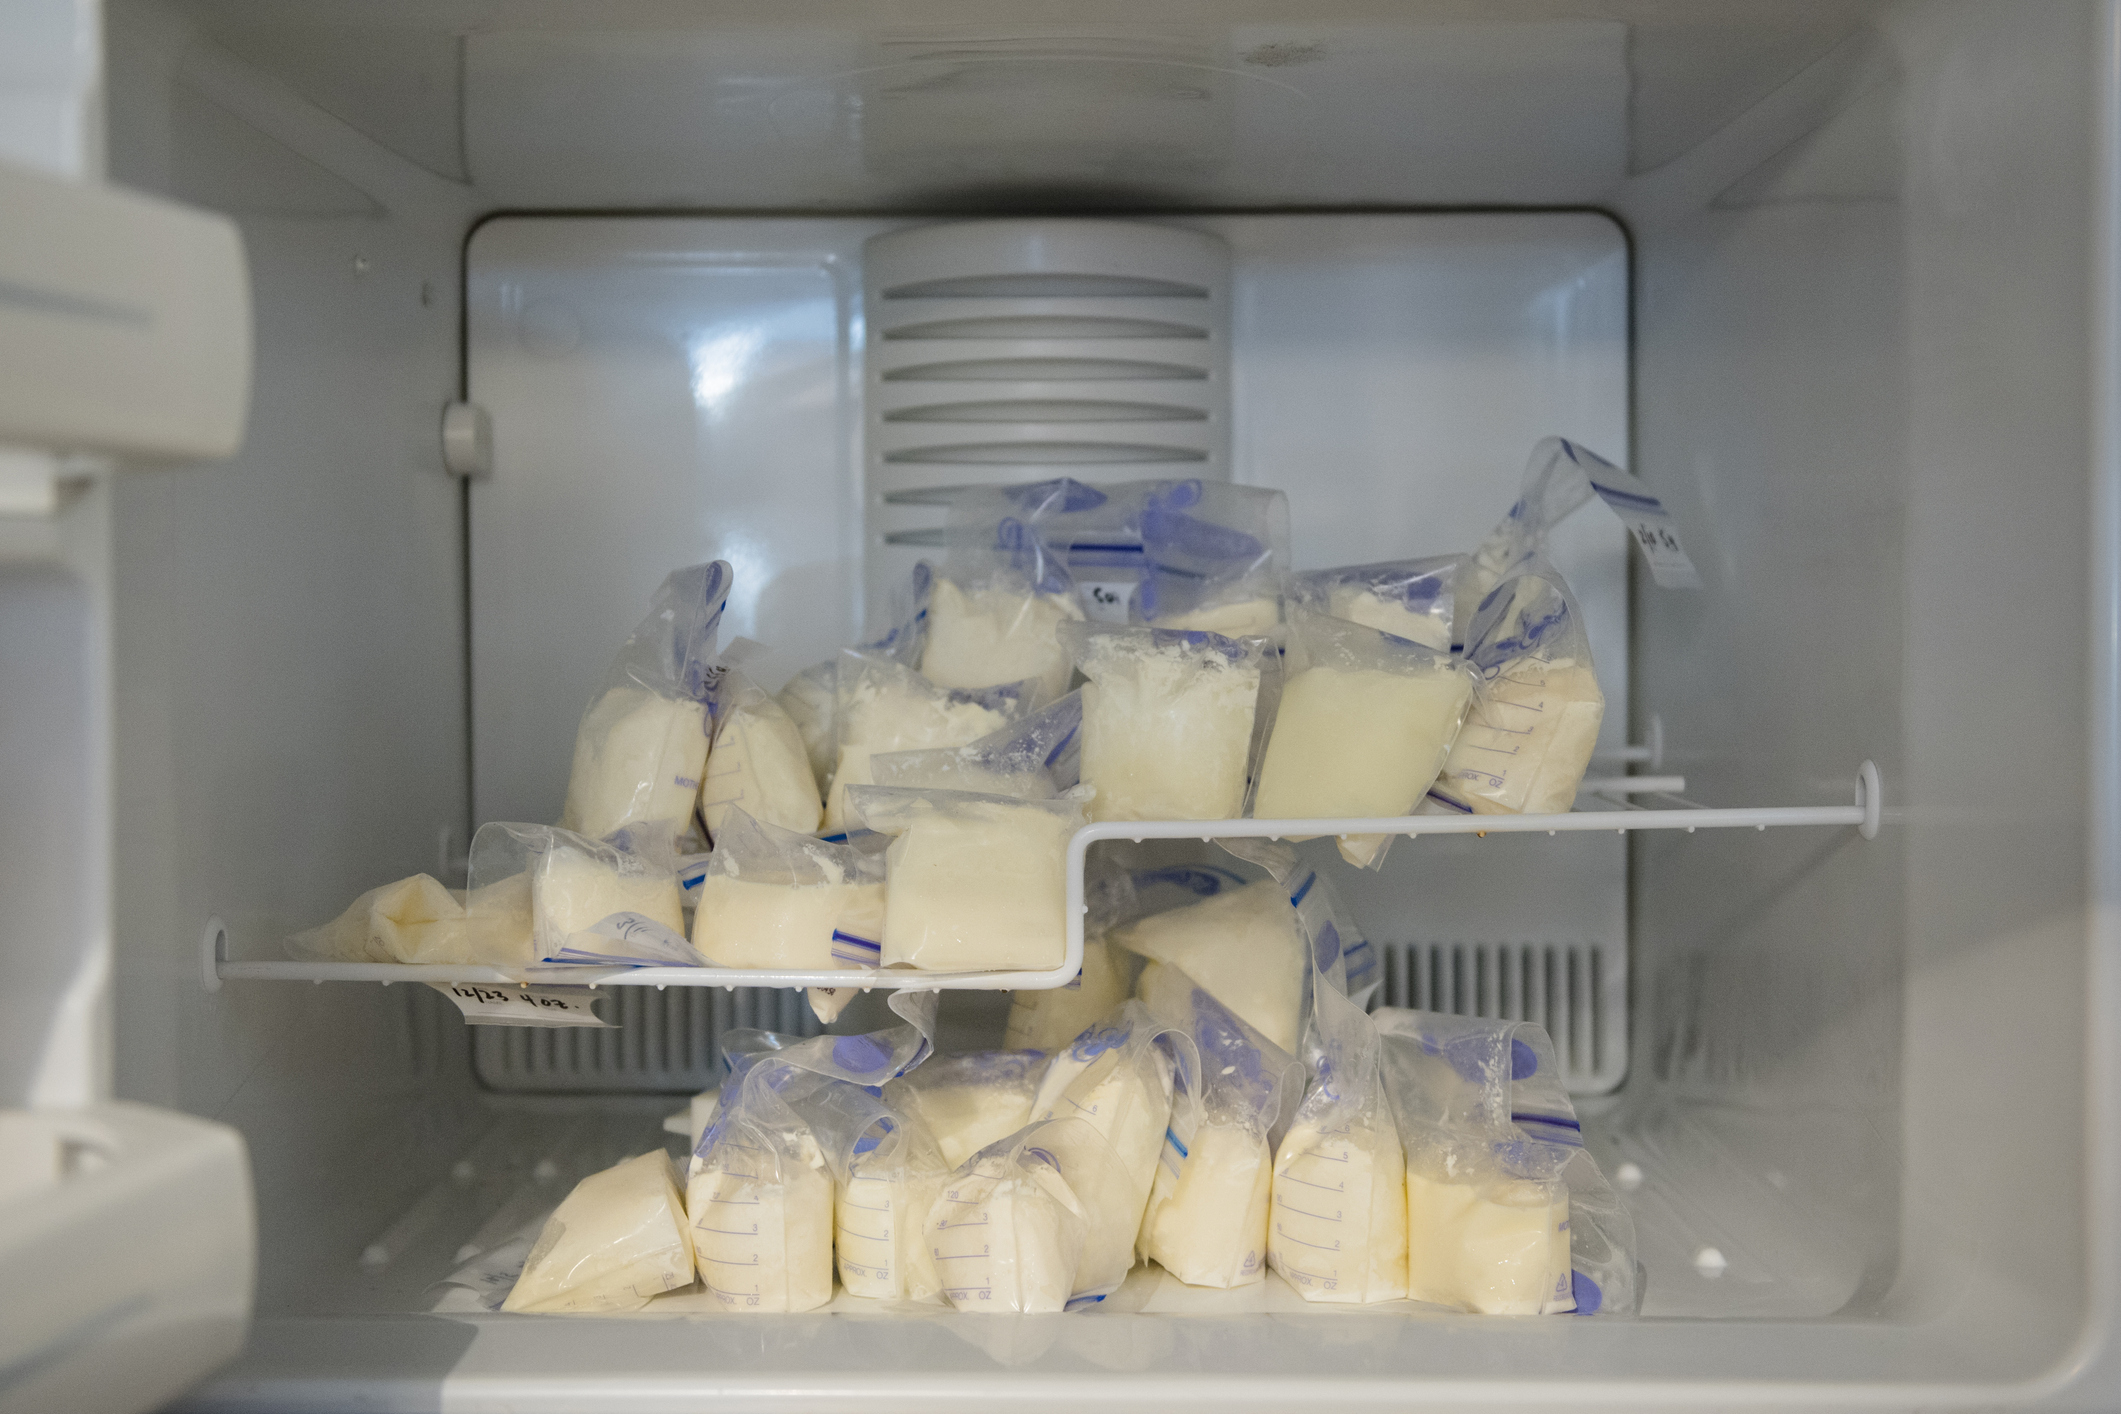 Breast milk stored in labeled bags inside a refrigerator freezer